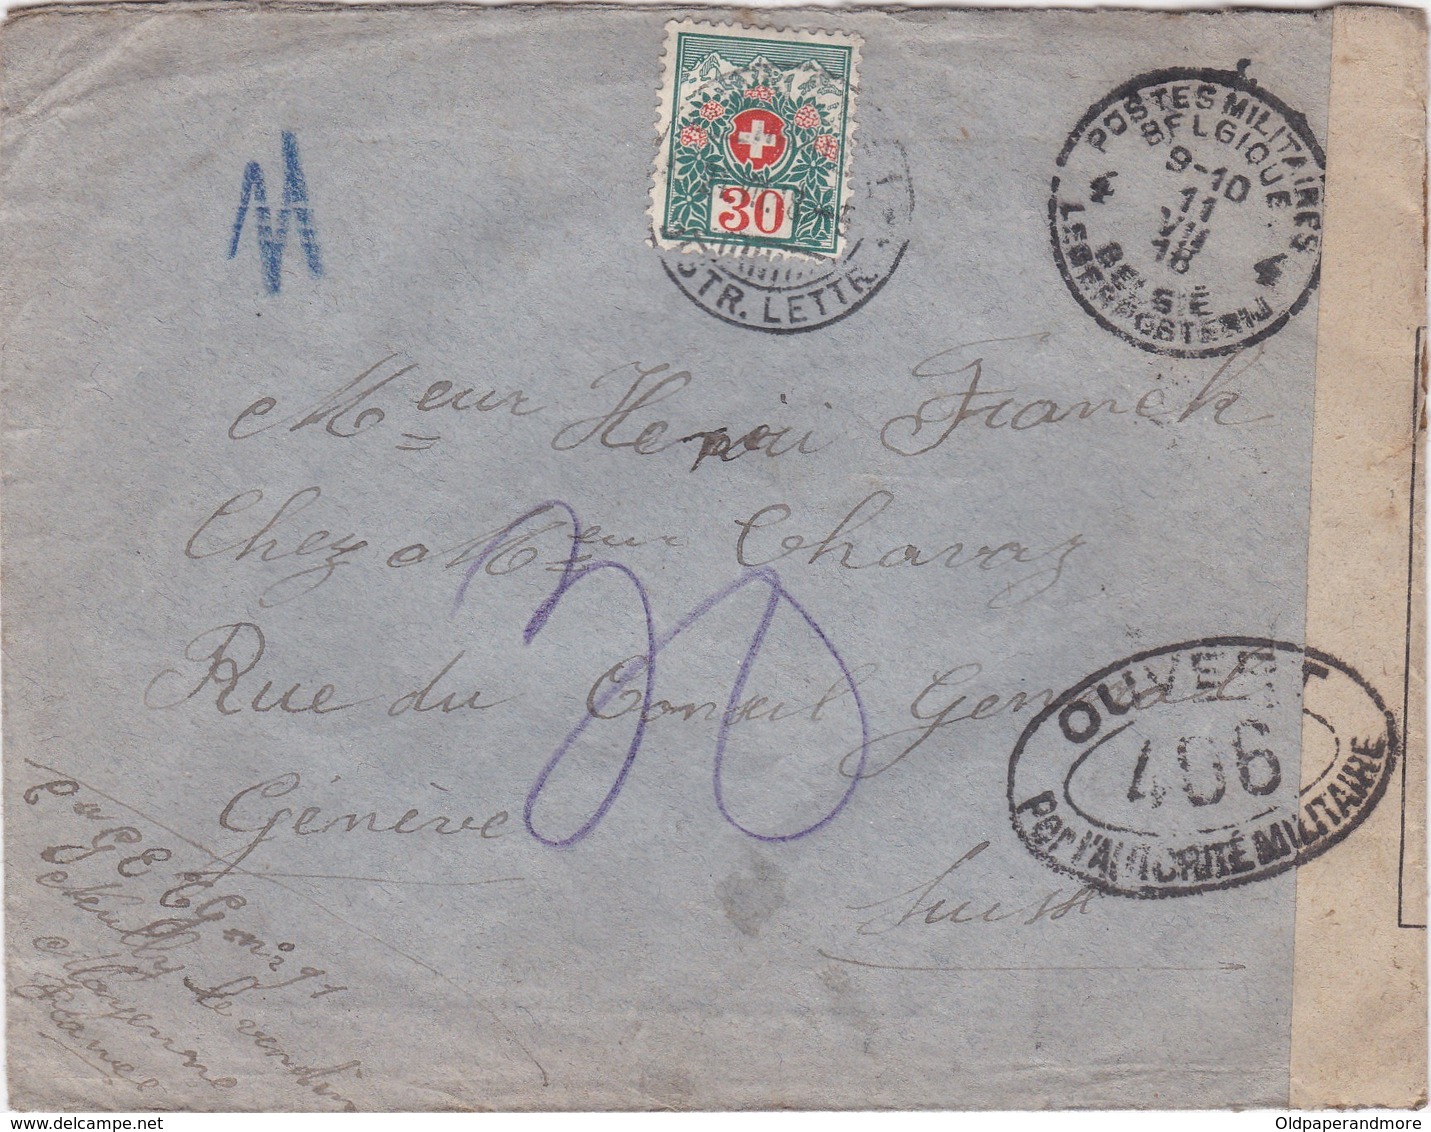 BELGIQUE - CIRCULATED  AND CENSURED COVER - RED CROSS REVENUE - MILITARY CANCEL TO GENEVE SUISSE - SWITZERLAND - Legerstempels